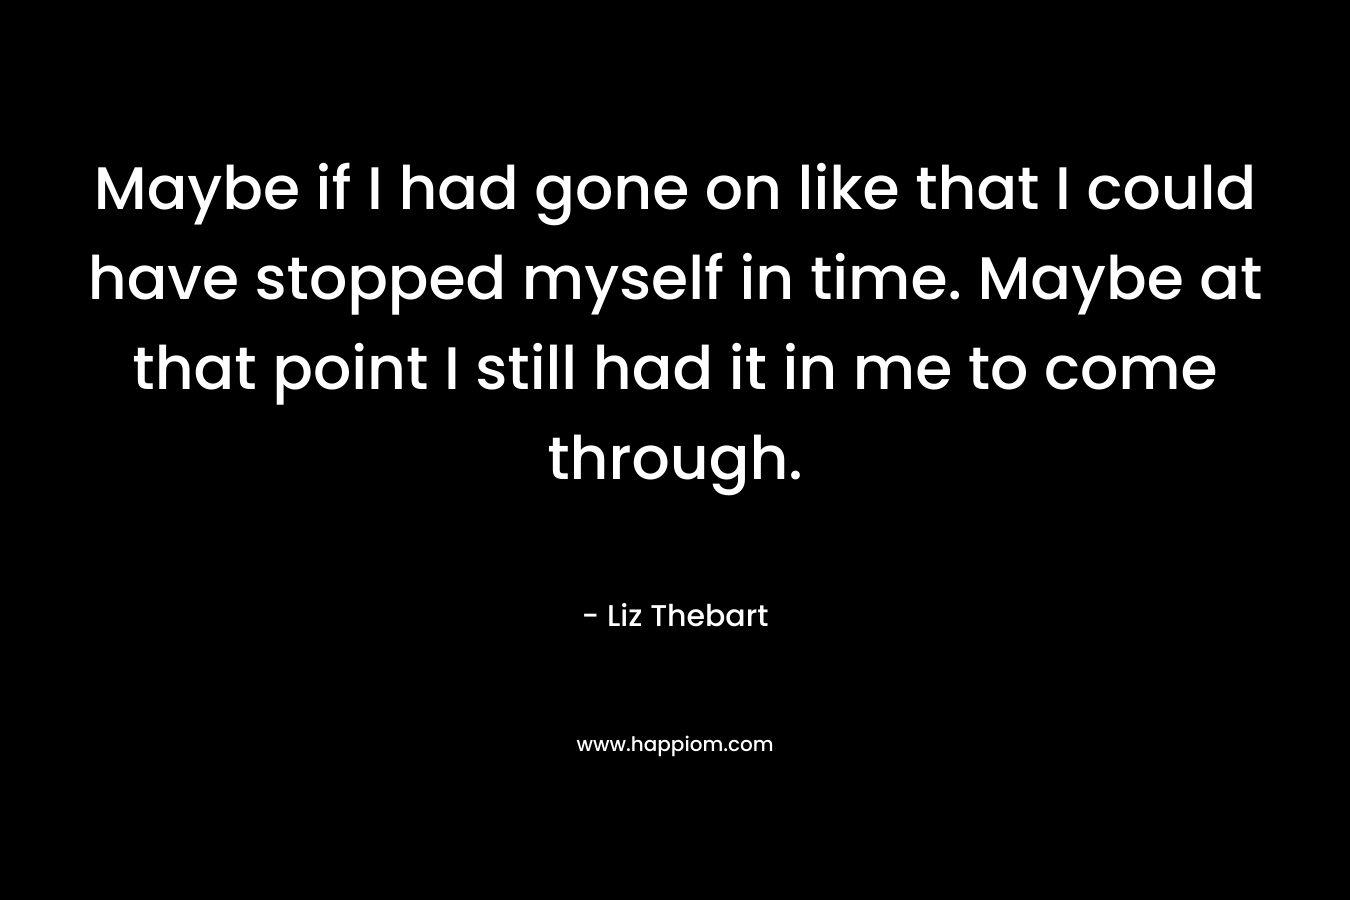 Maybe if I had gone on like that I could have stopped myself in time. Maybe at that point I still had it in me to come through.